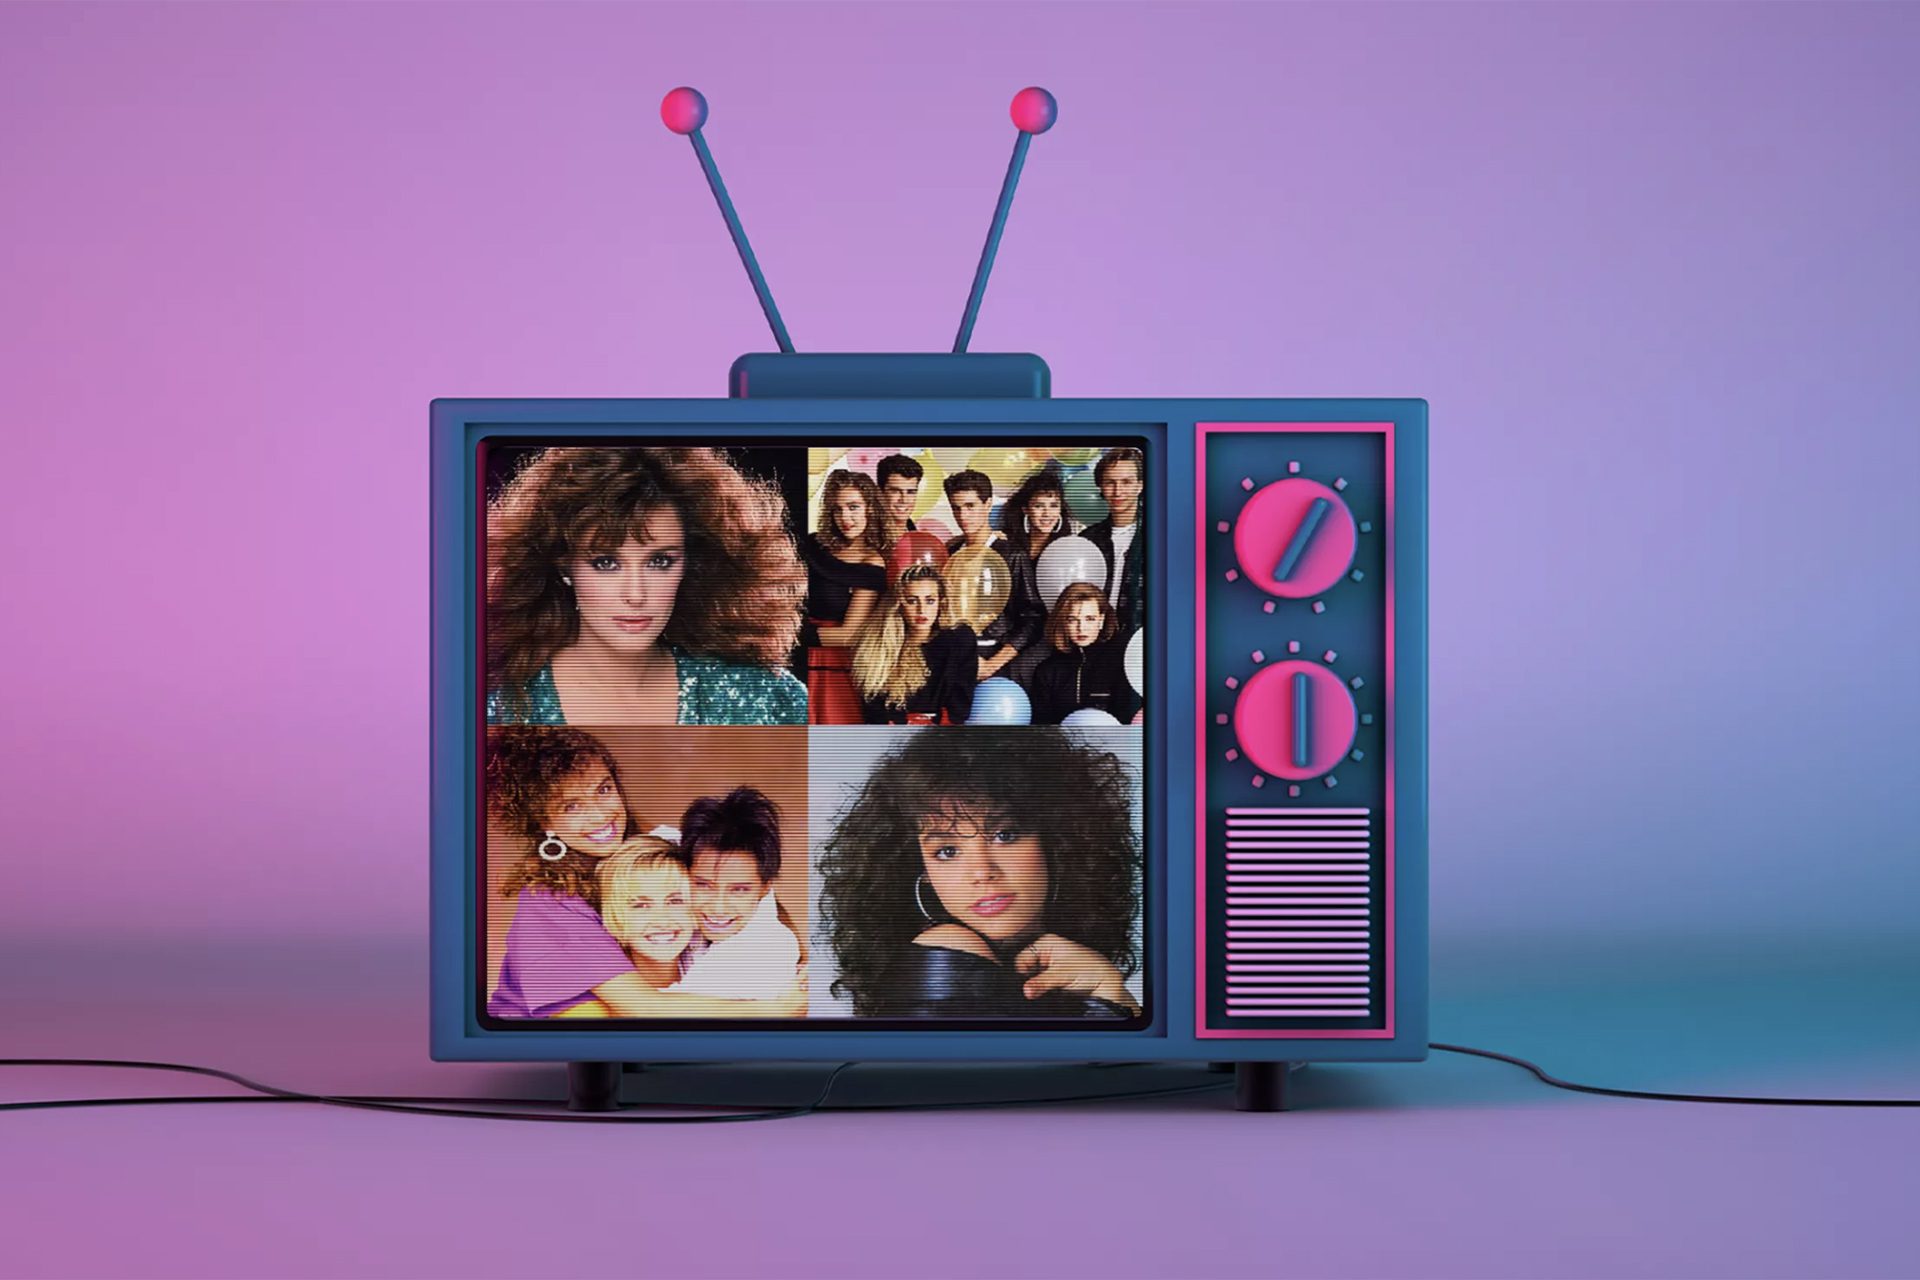 80's artists like: Flans, Timbiriche, Lucia Mendez, Locomia on a blue tv with a pink and blue fluorescent background